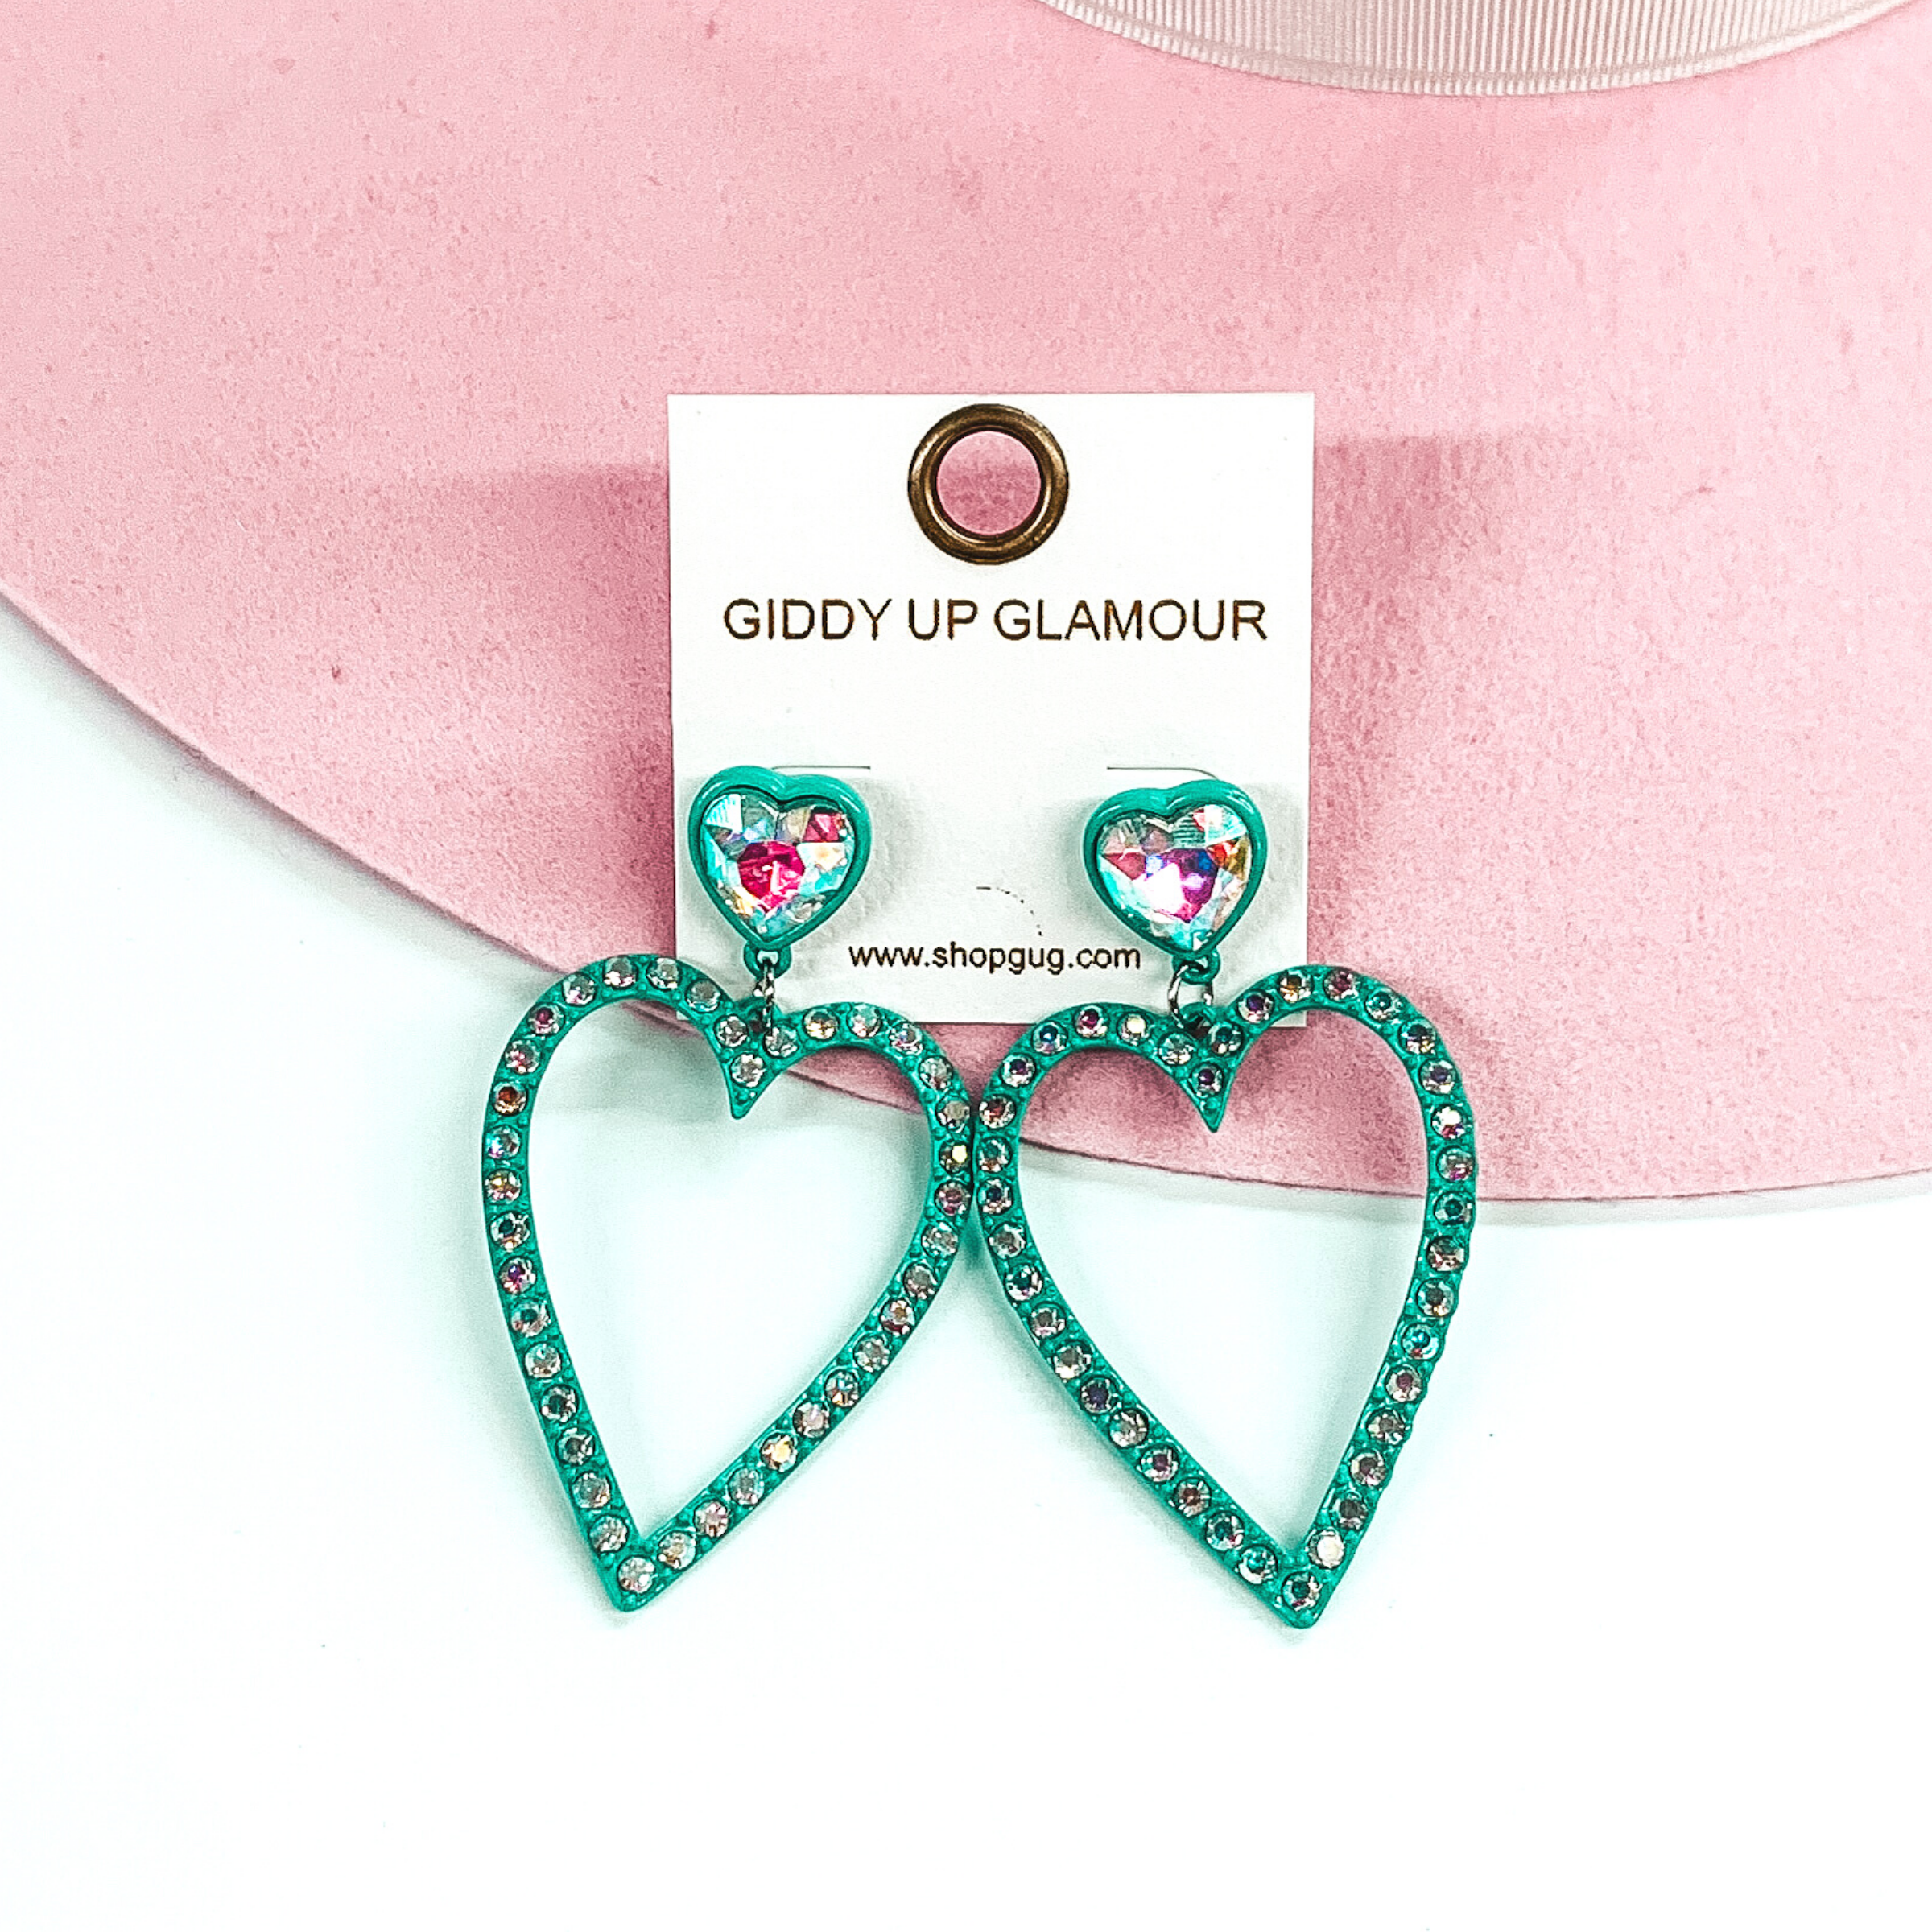 AB crystal heart shaped studs with a turquoise backing. The studs have a hanging heart outline pendant in turquoise with AB crystals. These earrings are pictured on a white and pink background. 